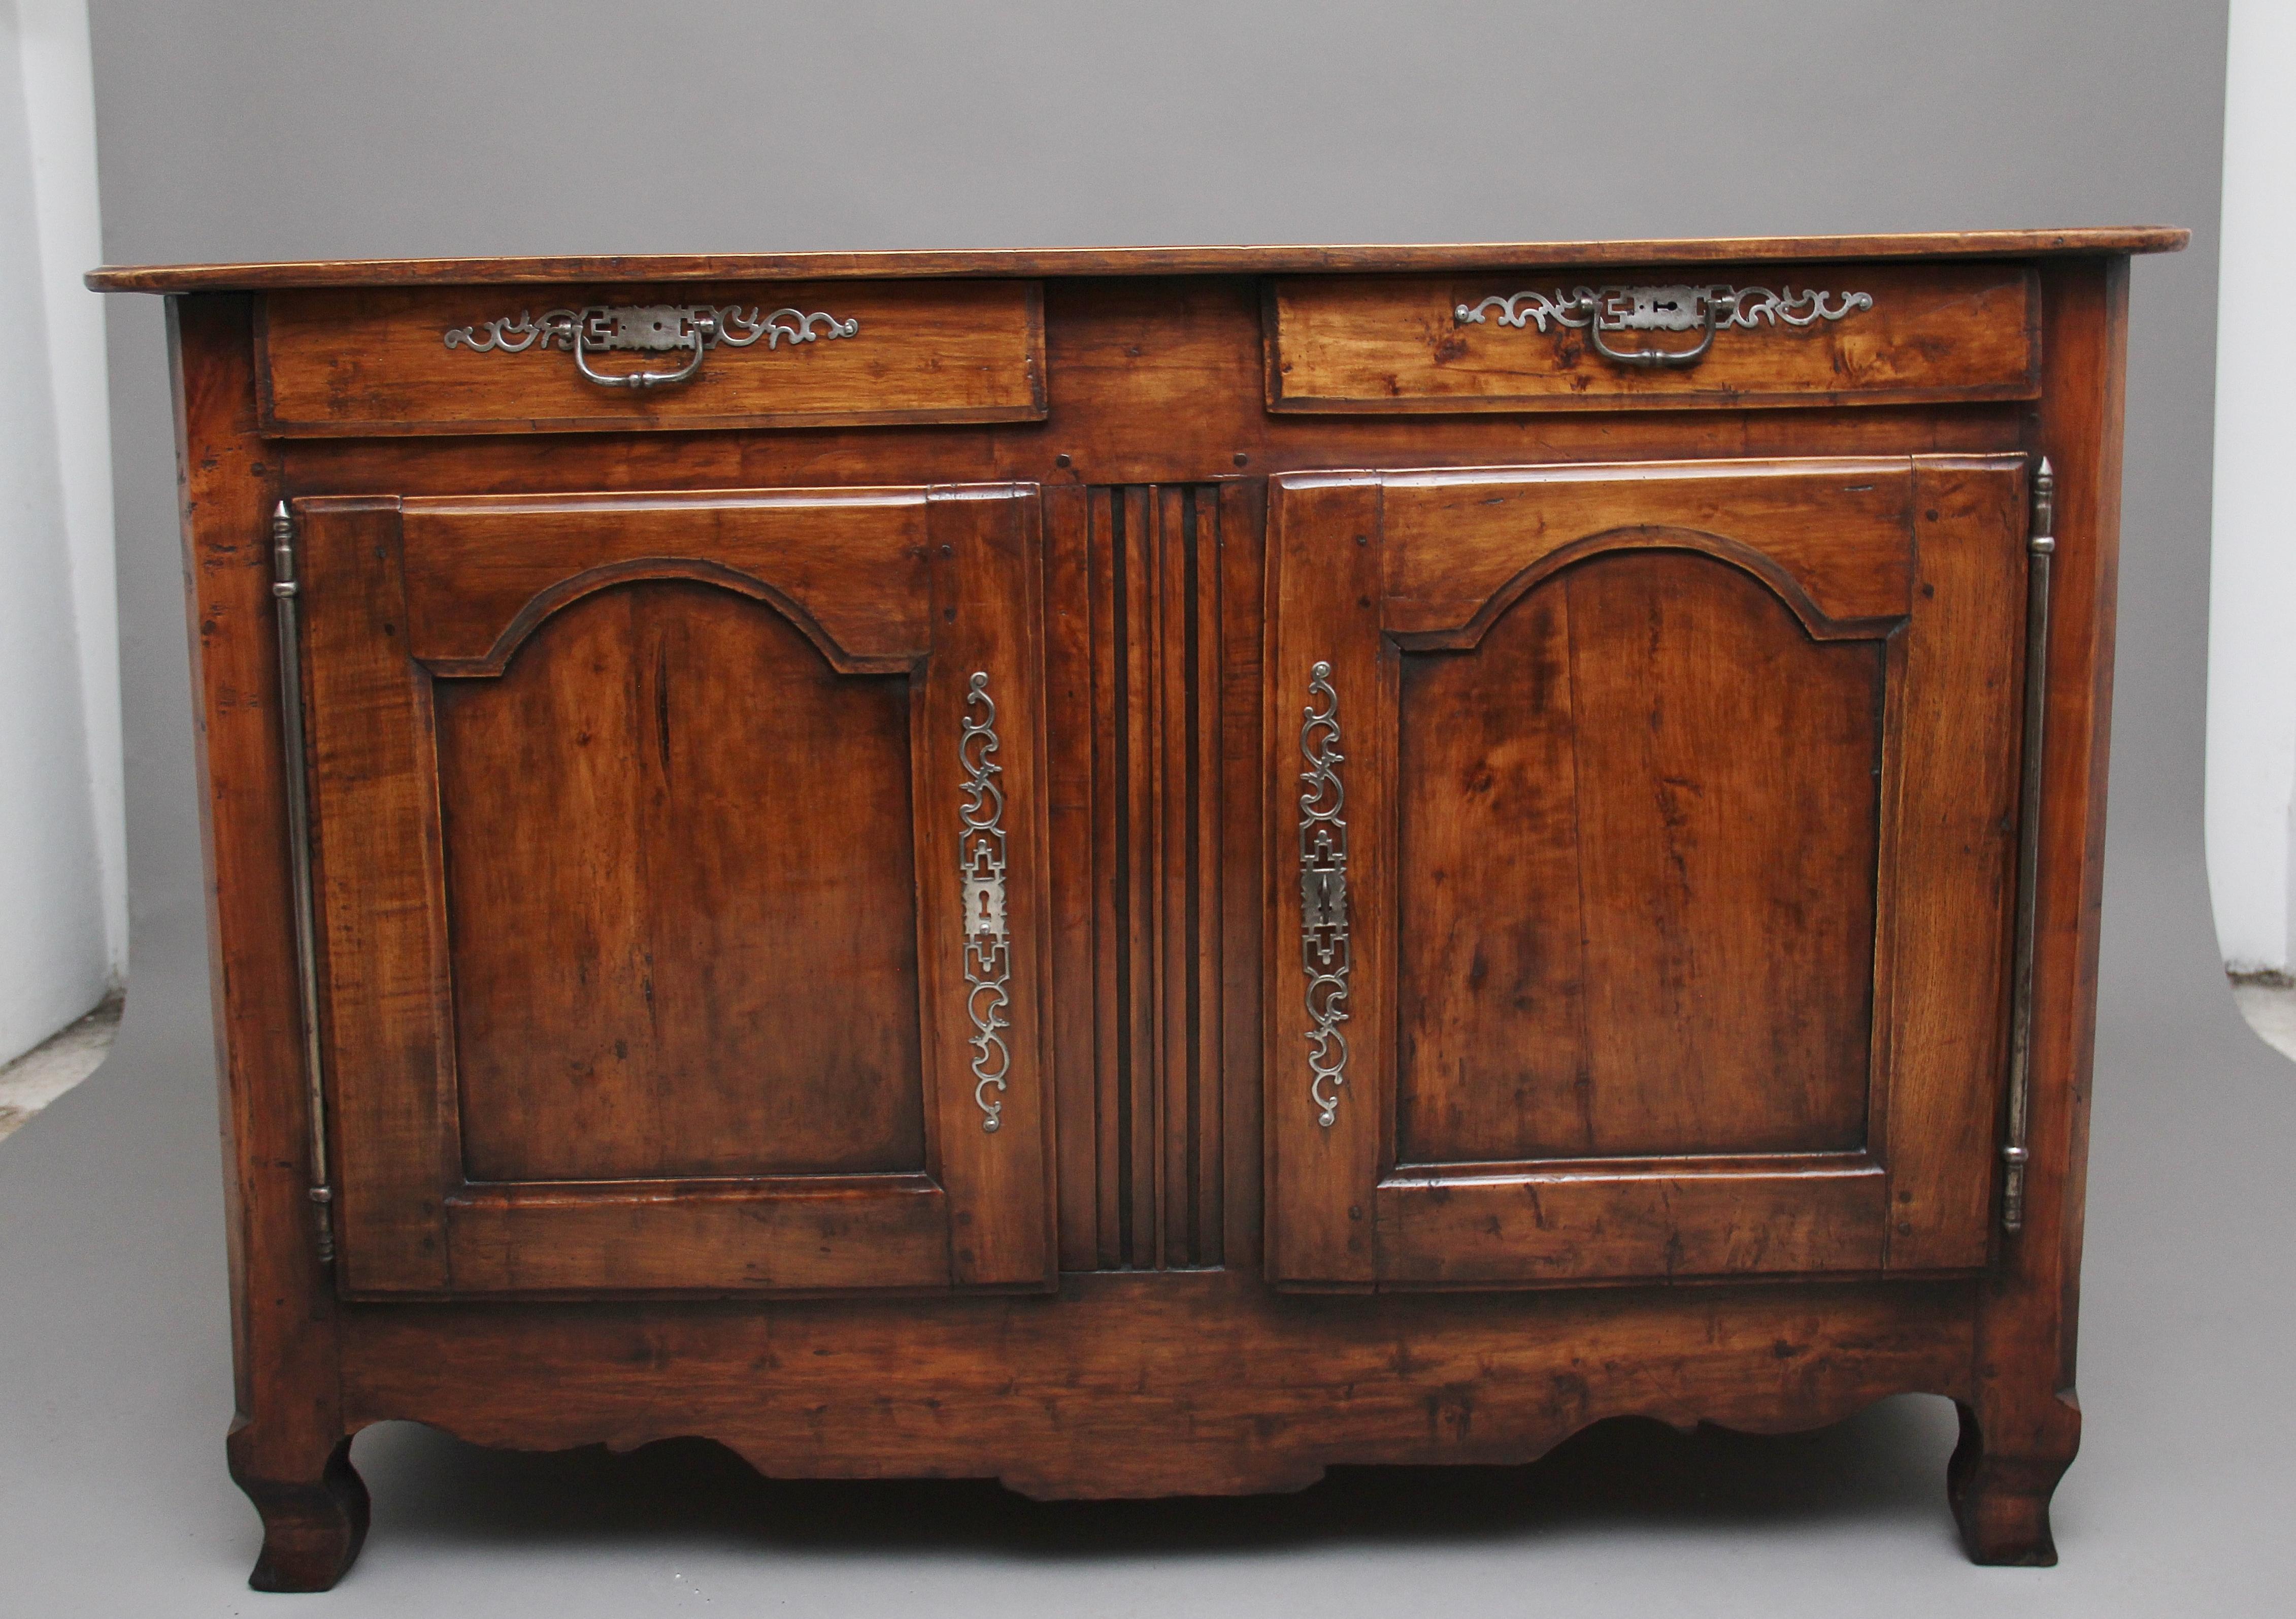 Early 19th century French cherrywood buffet, having a nice figured moulded edge top above two drawers and two cupboard doors below, with original brass handles and escutcheons, the cupboard doors having arched panels, the doors opening to reveal a